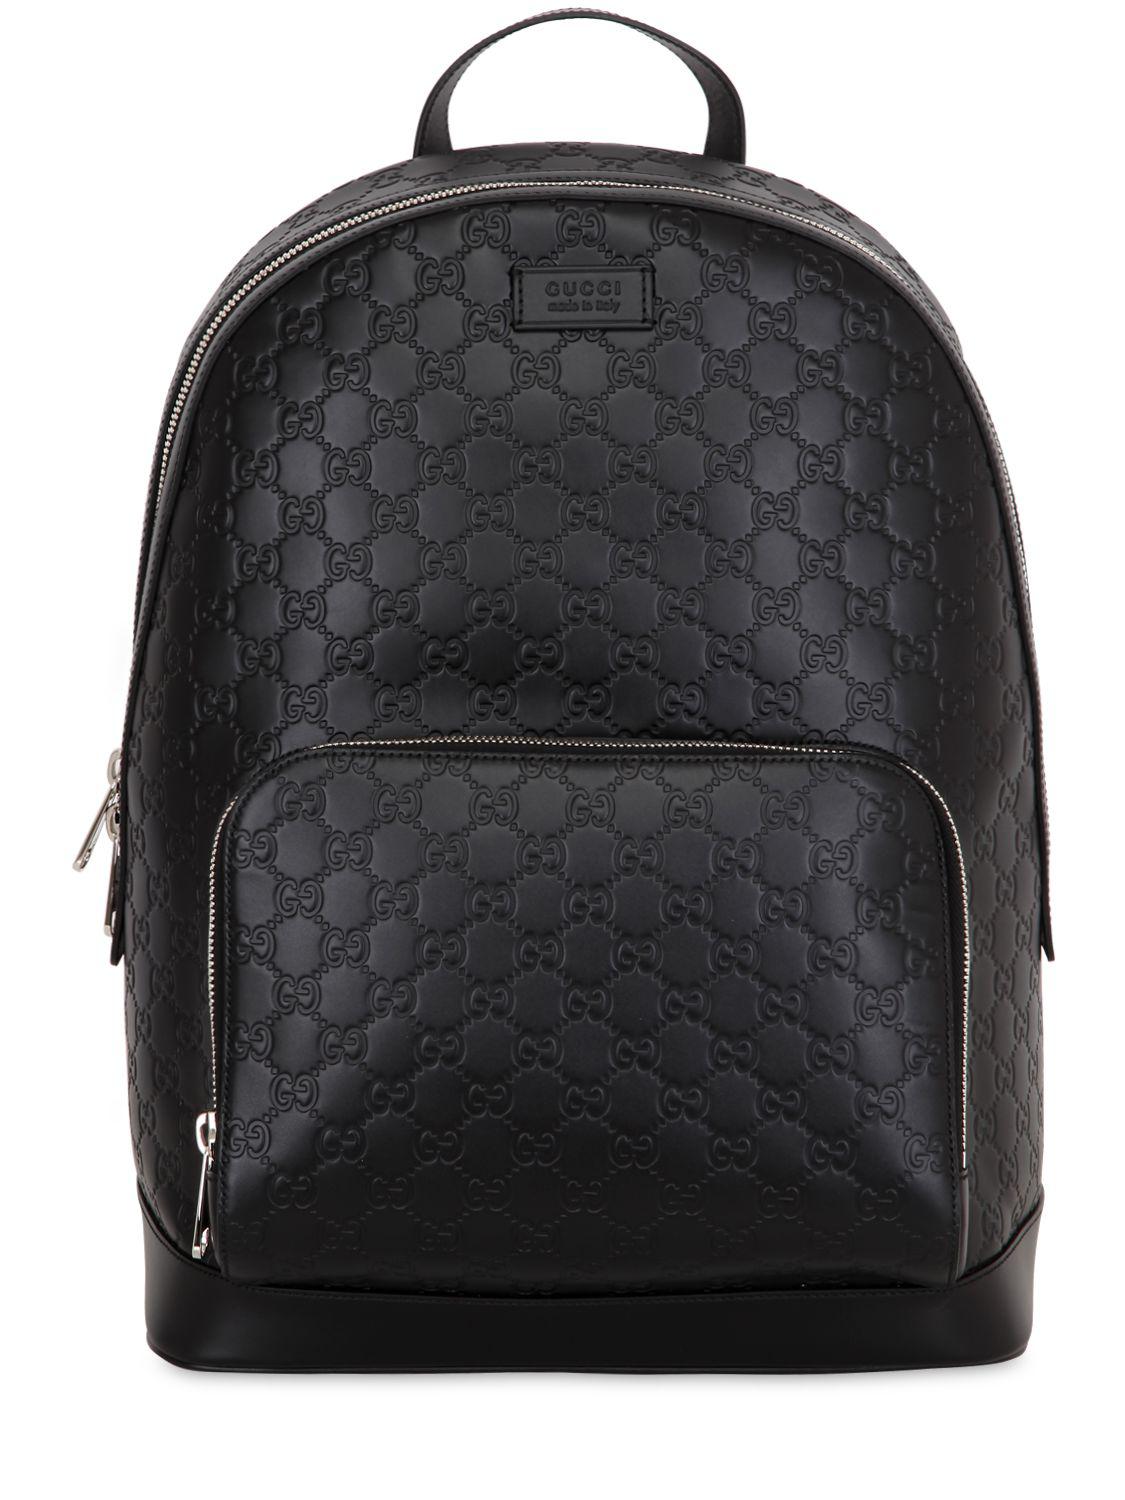 all black gucci backpack,Save up to 16%,www.ilcascinone.com